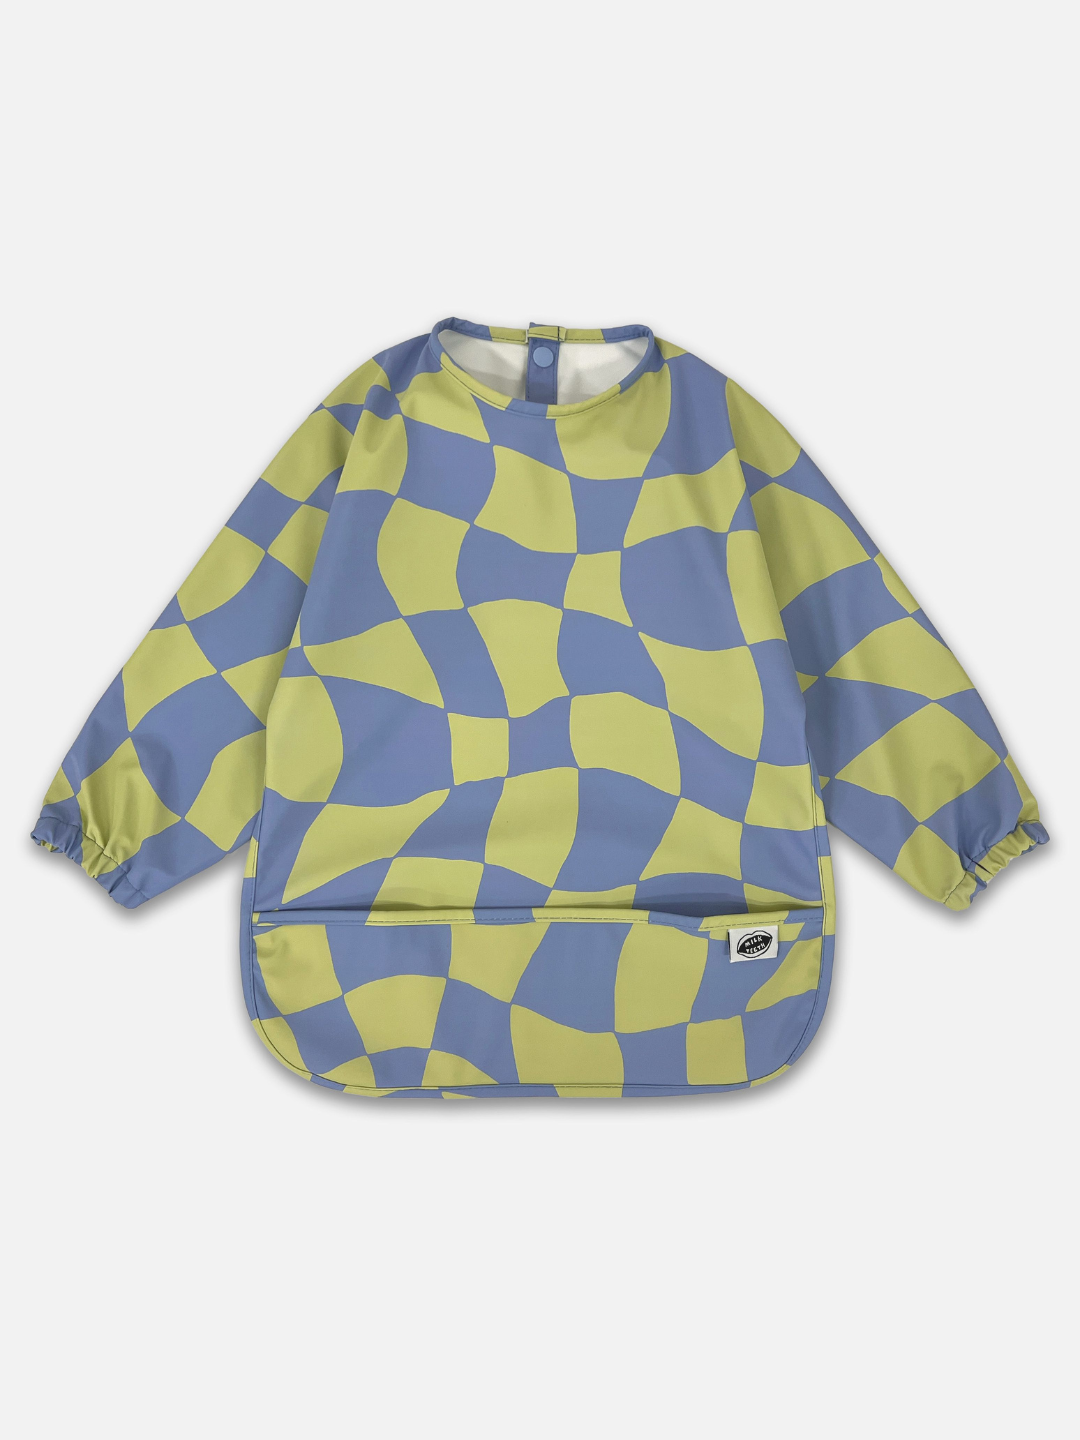 Green Checkers | A front view  of the long sleeve light green and blue wavy checked bib with a front pocket.